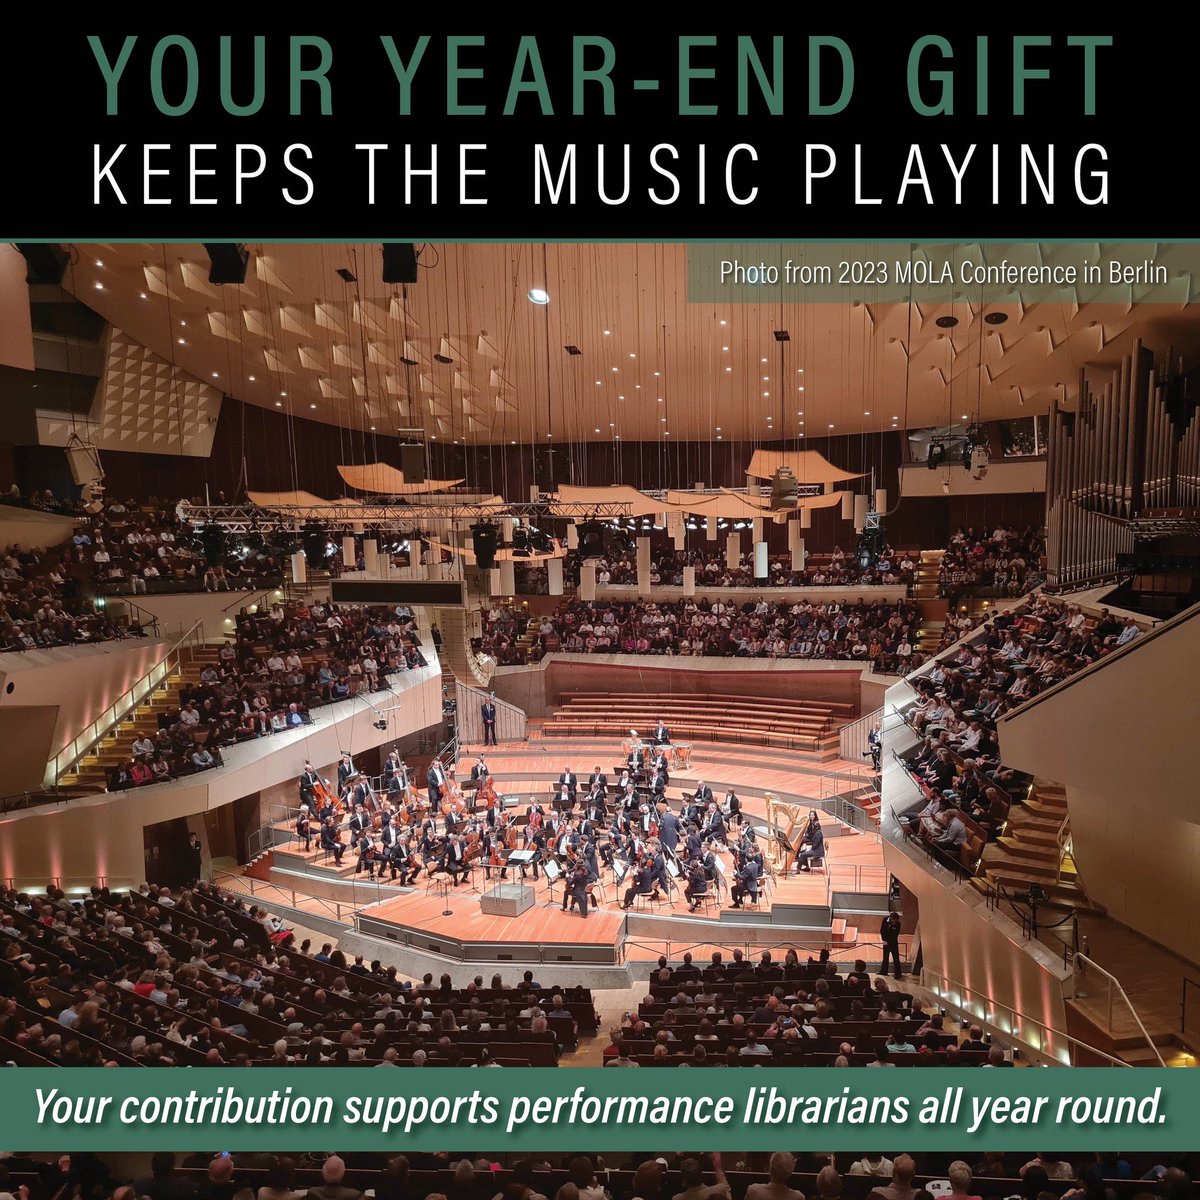 Performance librarians do valuable work to keep the music playing, and your support makes it all possible. This year, please consider making a donation to MOLA visiting mola-inc.org/p/donate or by texting 'MOLA' to 44-321. #musiclibrarian #musiclibrary #mola #Giving